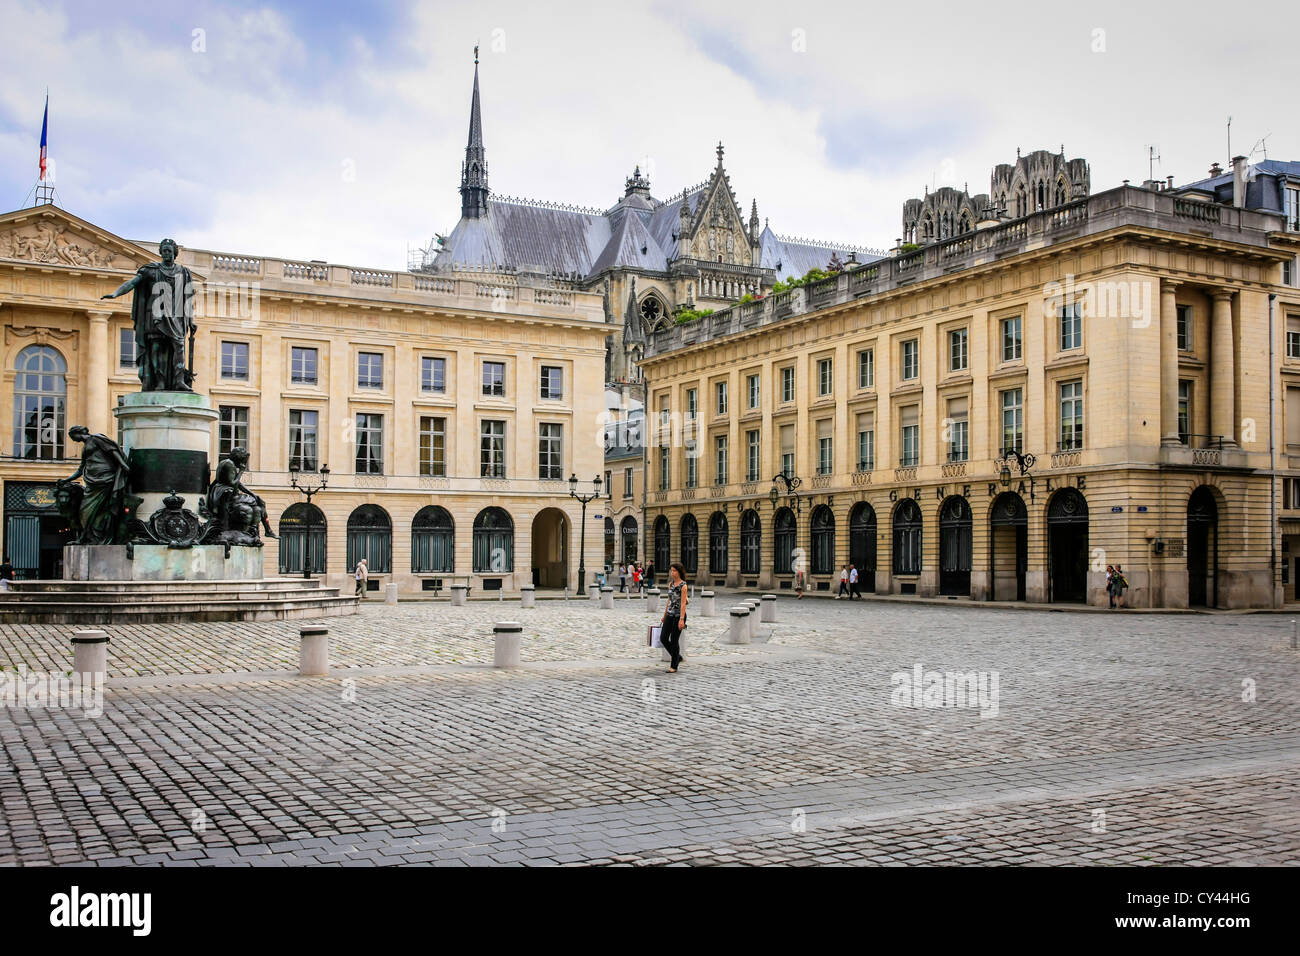 Image of Louis XV welcomed at Paris town hall for St John